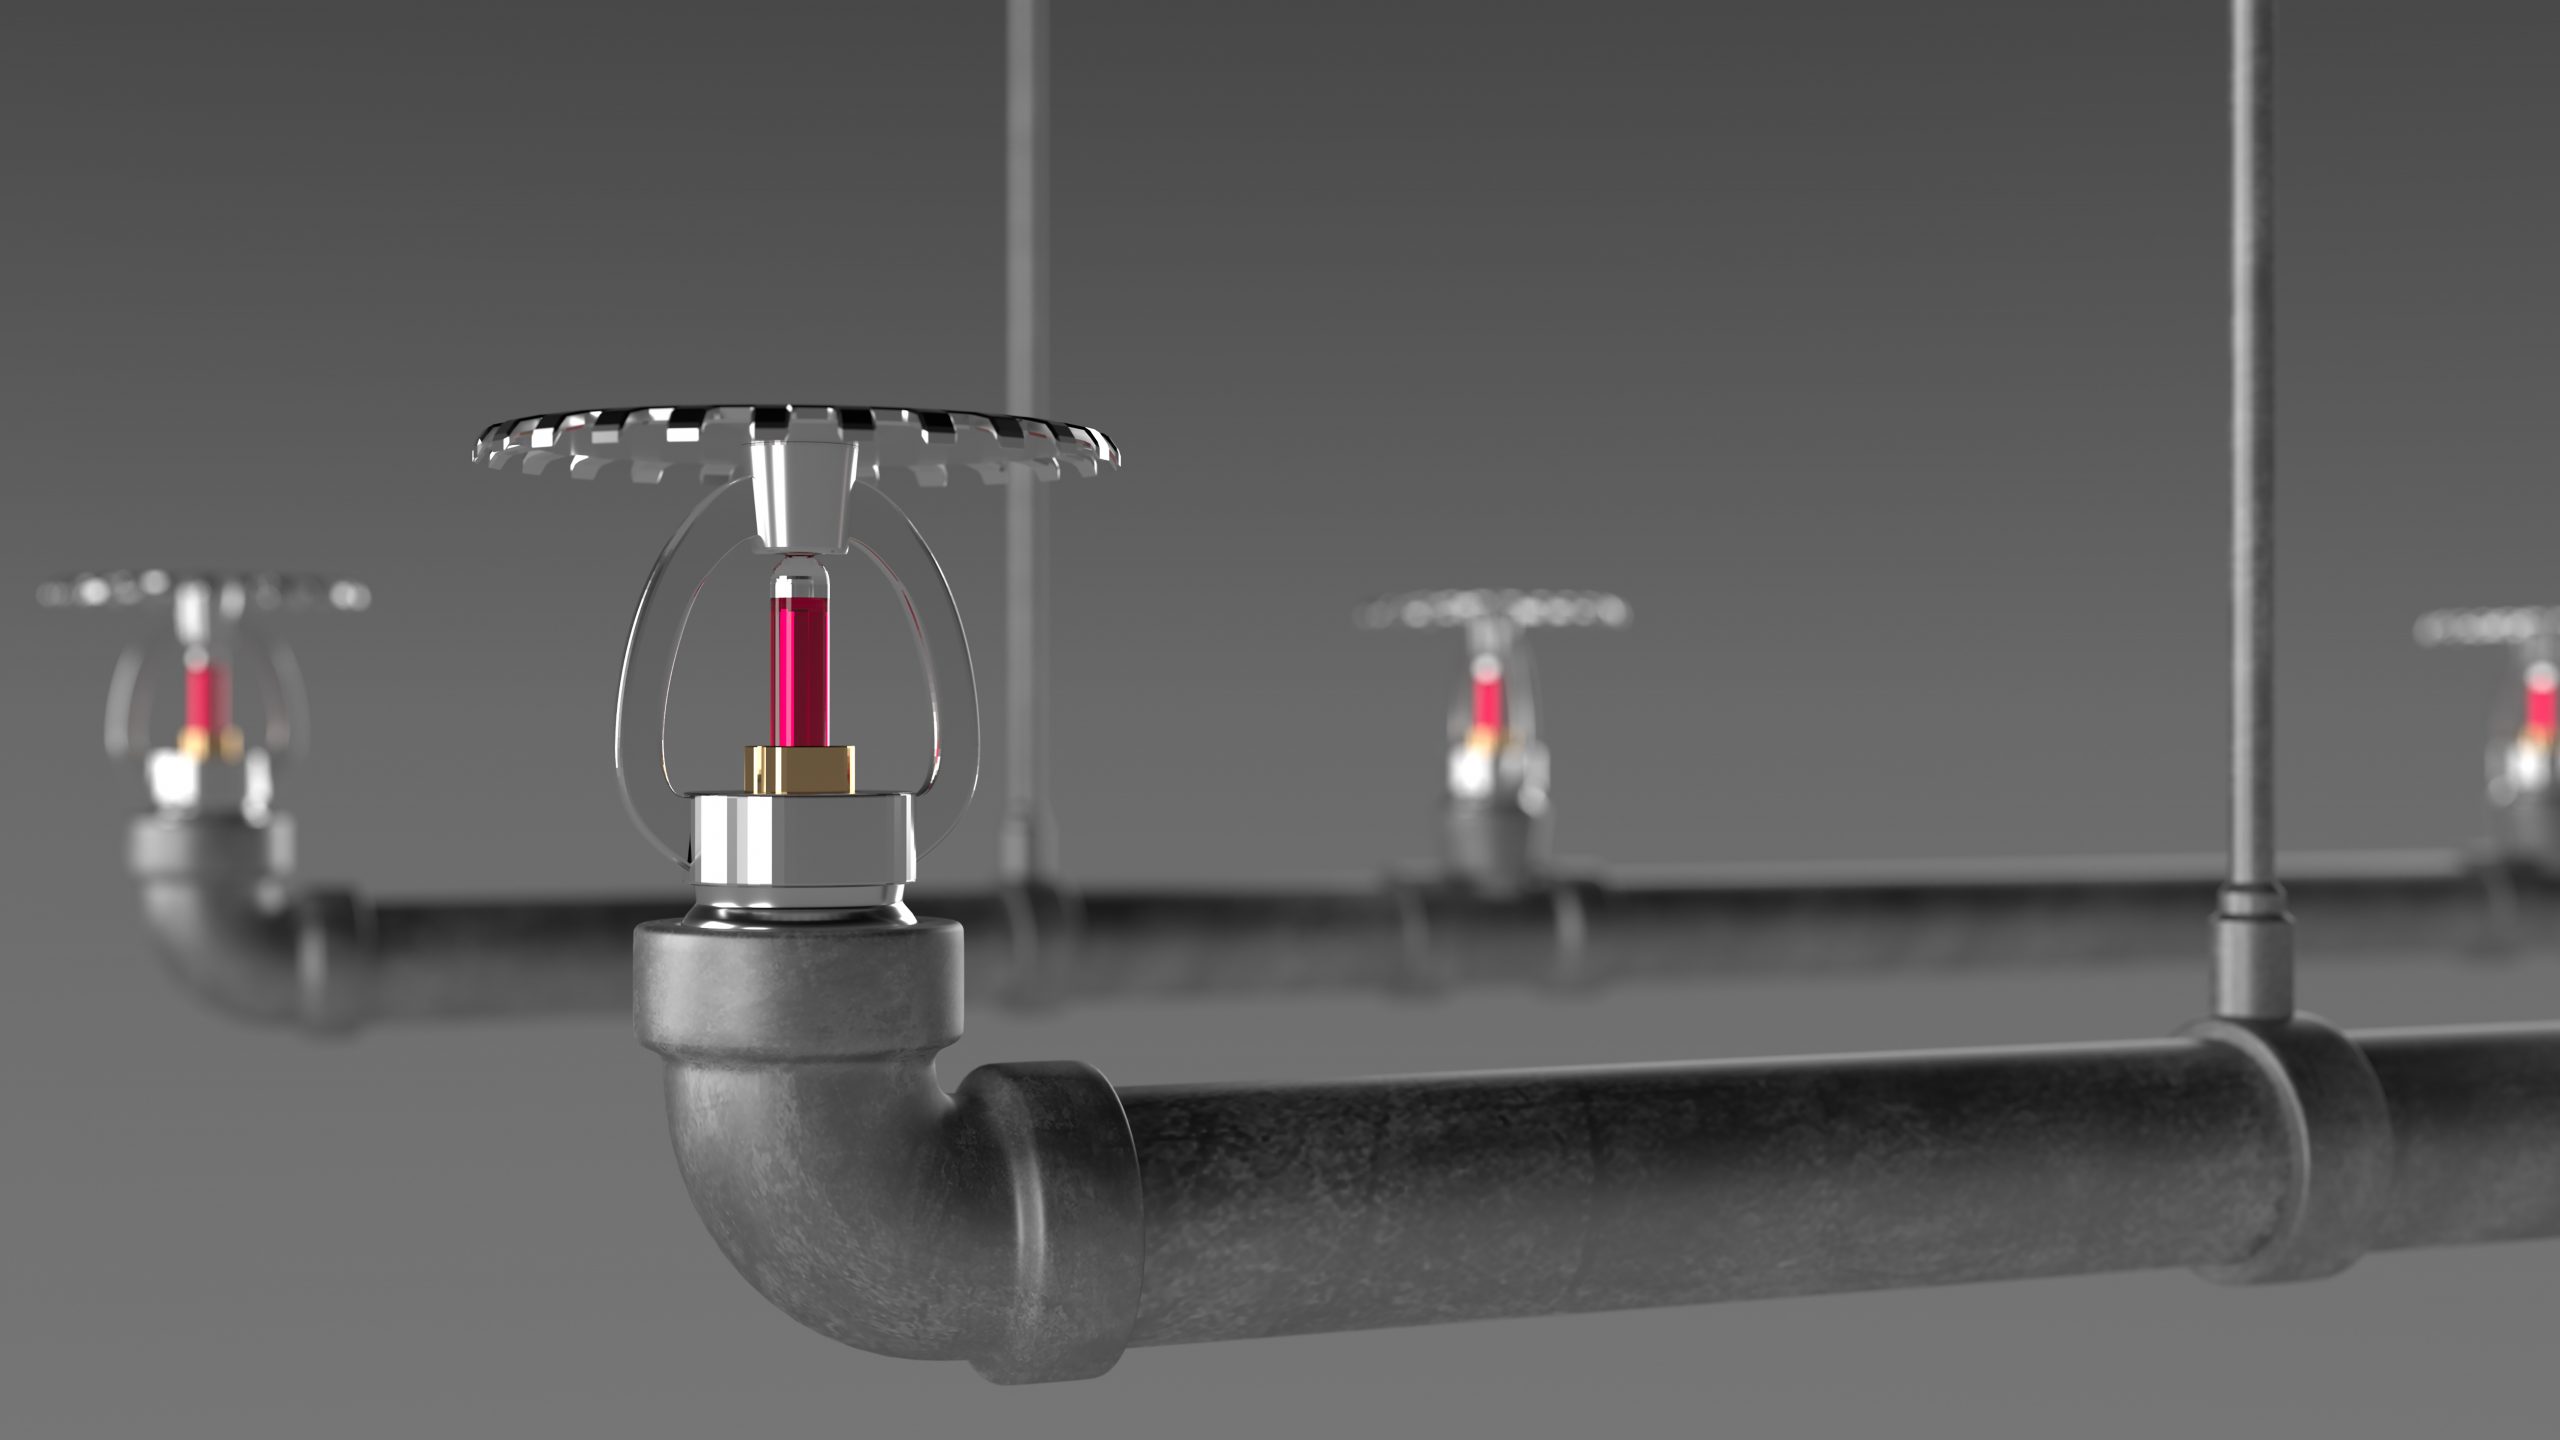 4 Reasons Why a Sprinkler System Should be Fitted in All Buildings